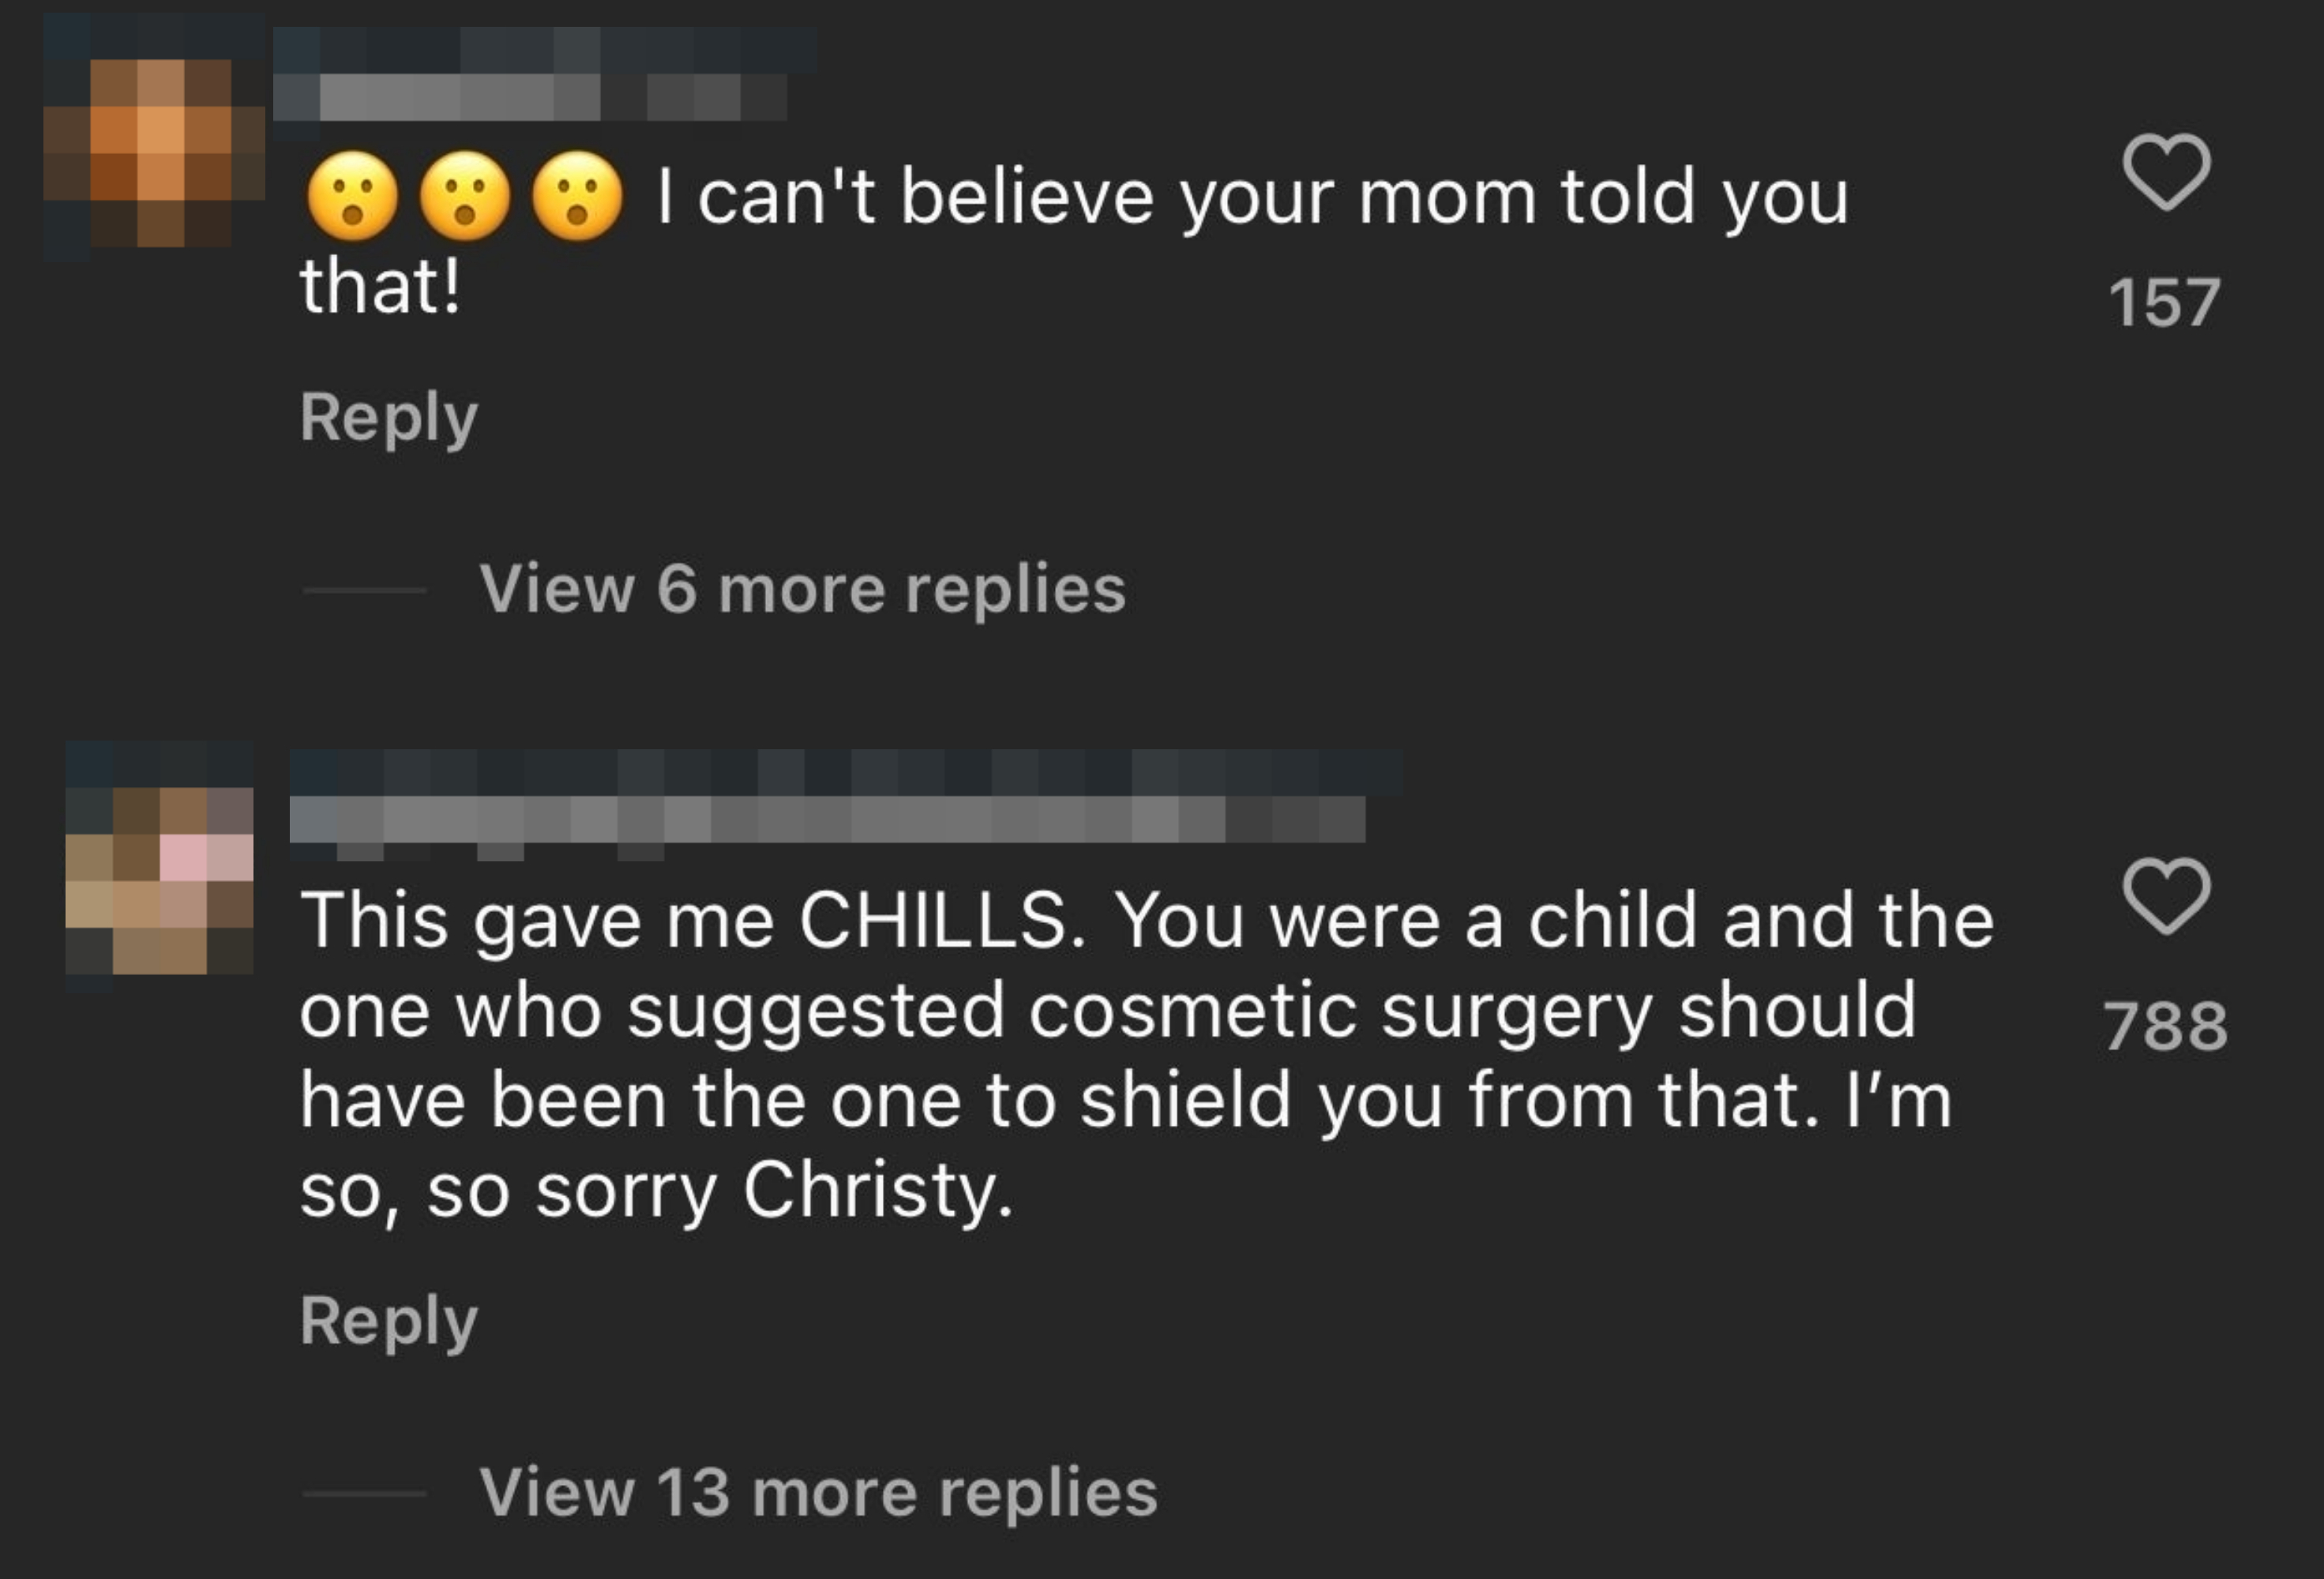 Two Instagram comments: &quot;I can&#x27;t believe your mom told you that!&quot; and &quot;This gave me CHILLS; you were a child and the one who suggested cosmetic surgery should have been the one to shield you from that&quot;